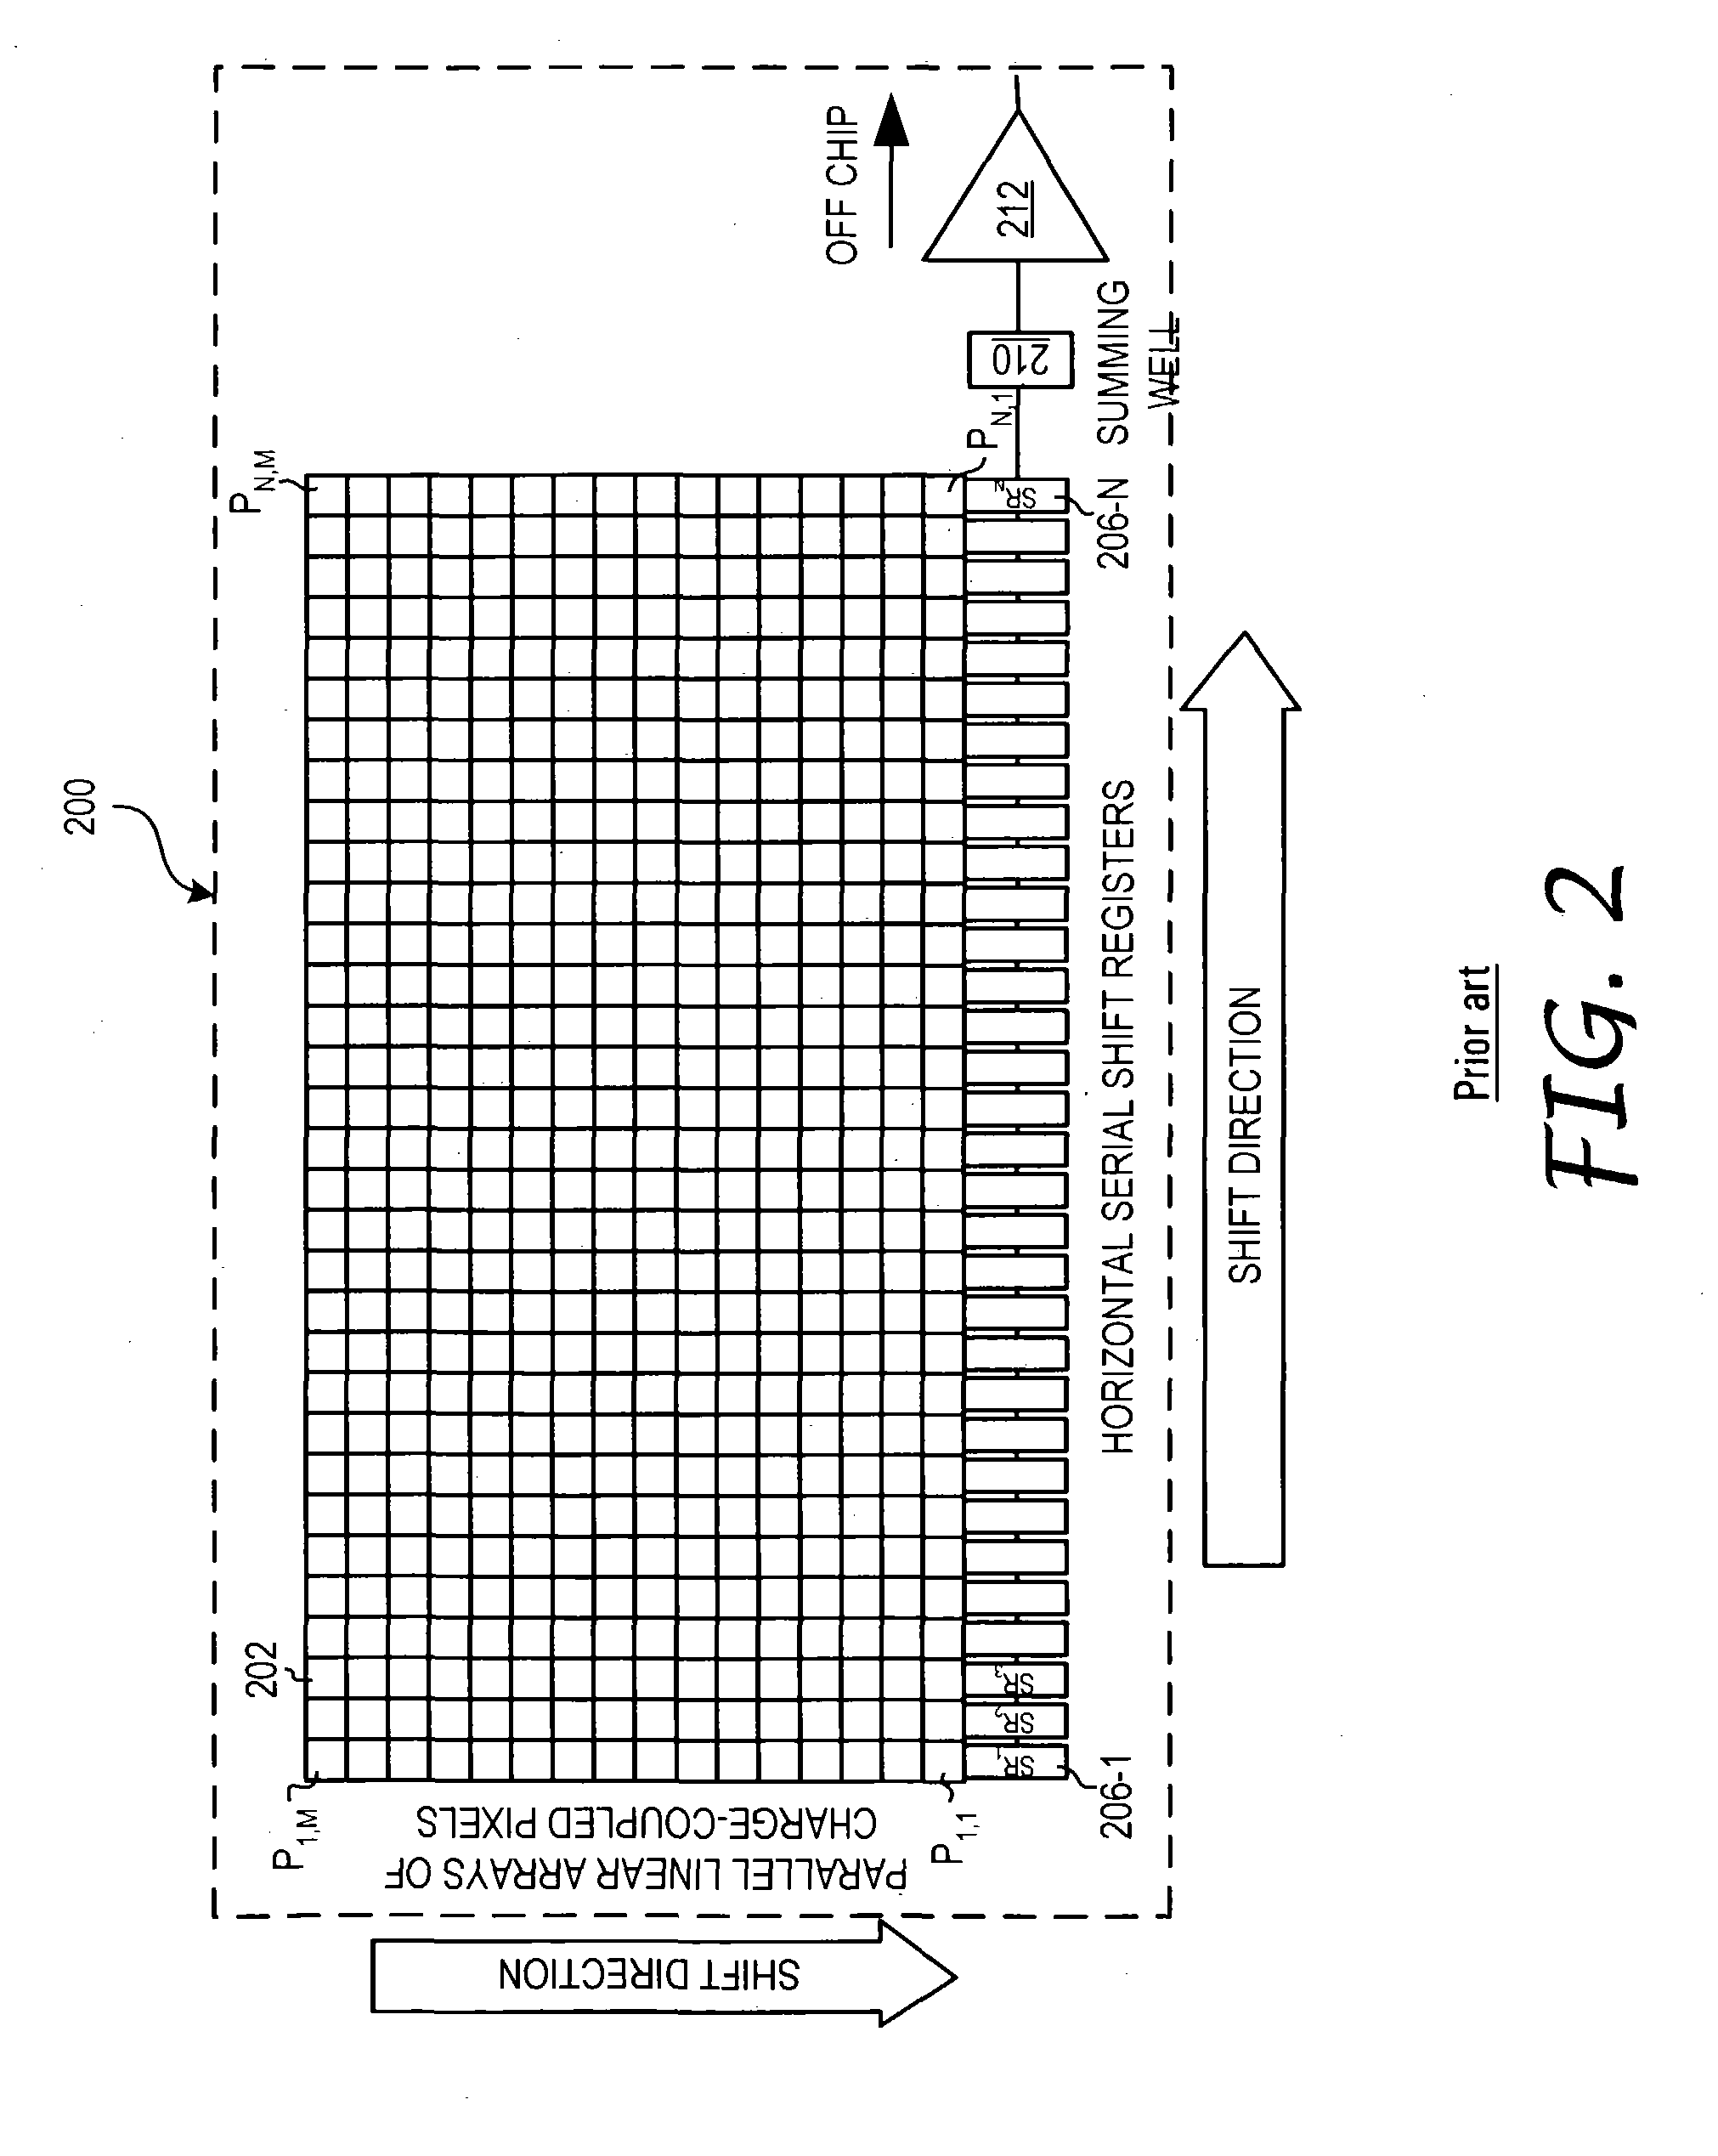 Apparatus and method for enhancing dynamic range of charge coupled device-based spectrograph